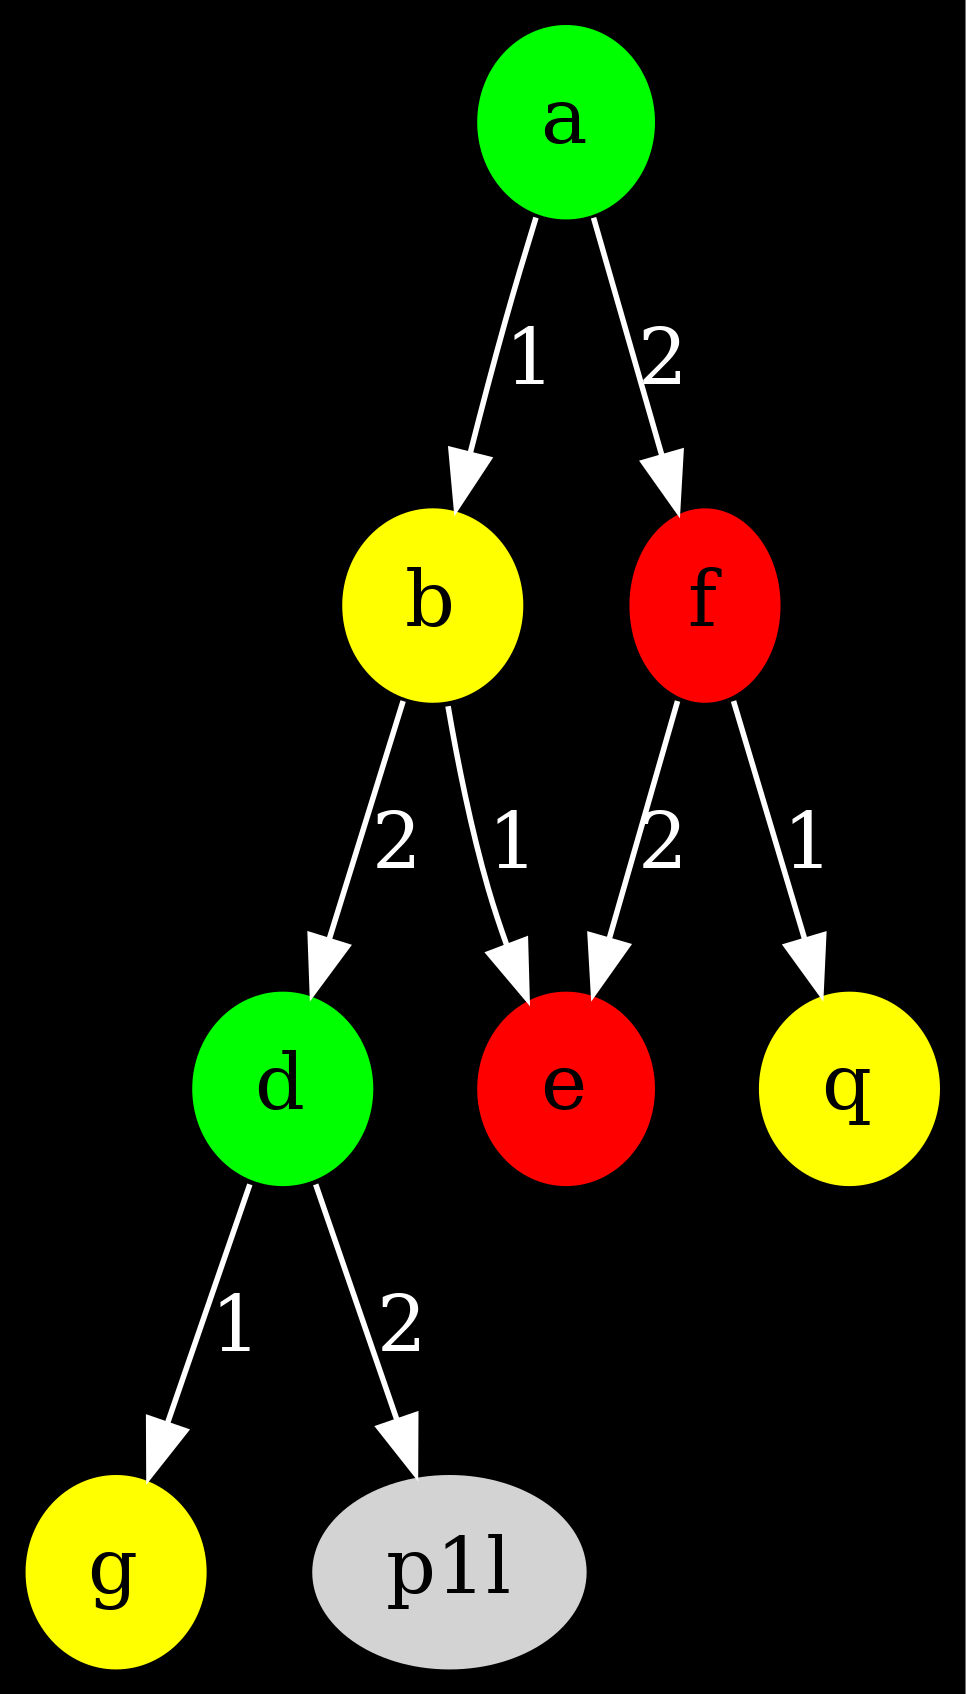 Subset of the graph describing the puzzle instance